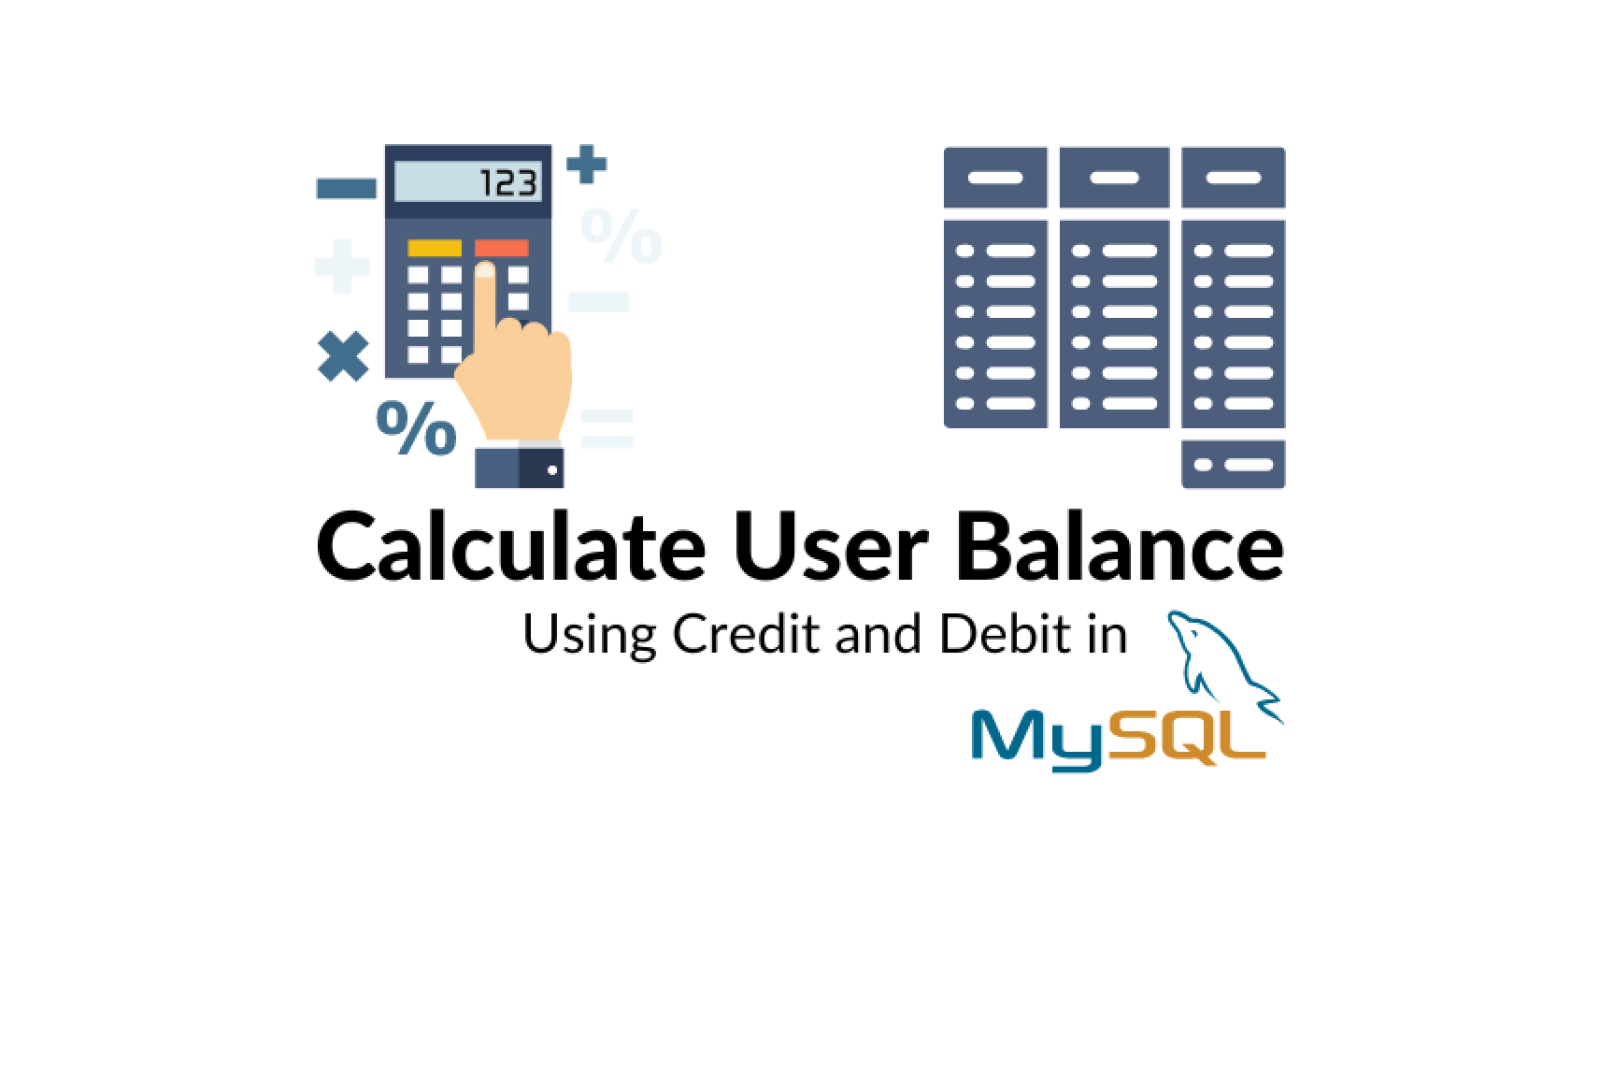 How to Calculate User Balance Using Credit and Debit in MySQL